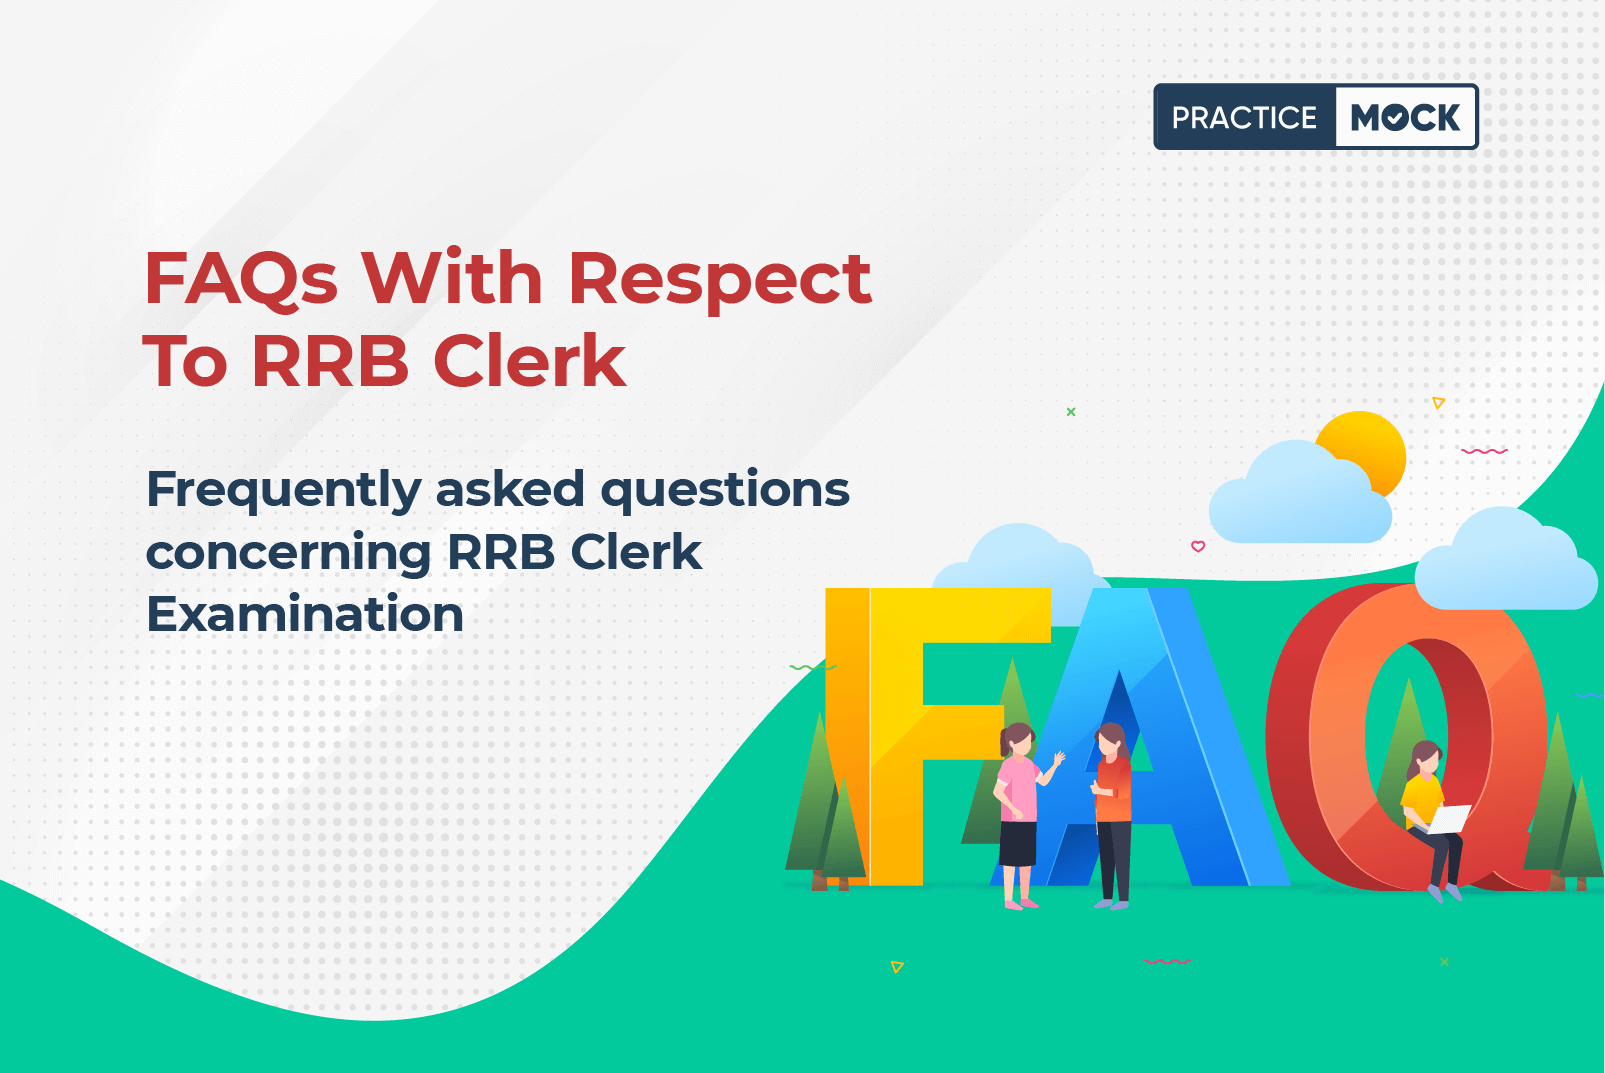 FAQs Related To RRB Clerk Examination